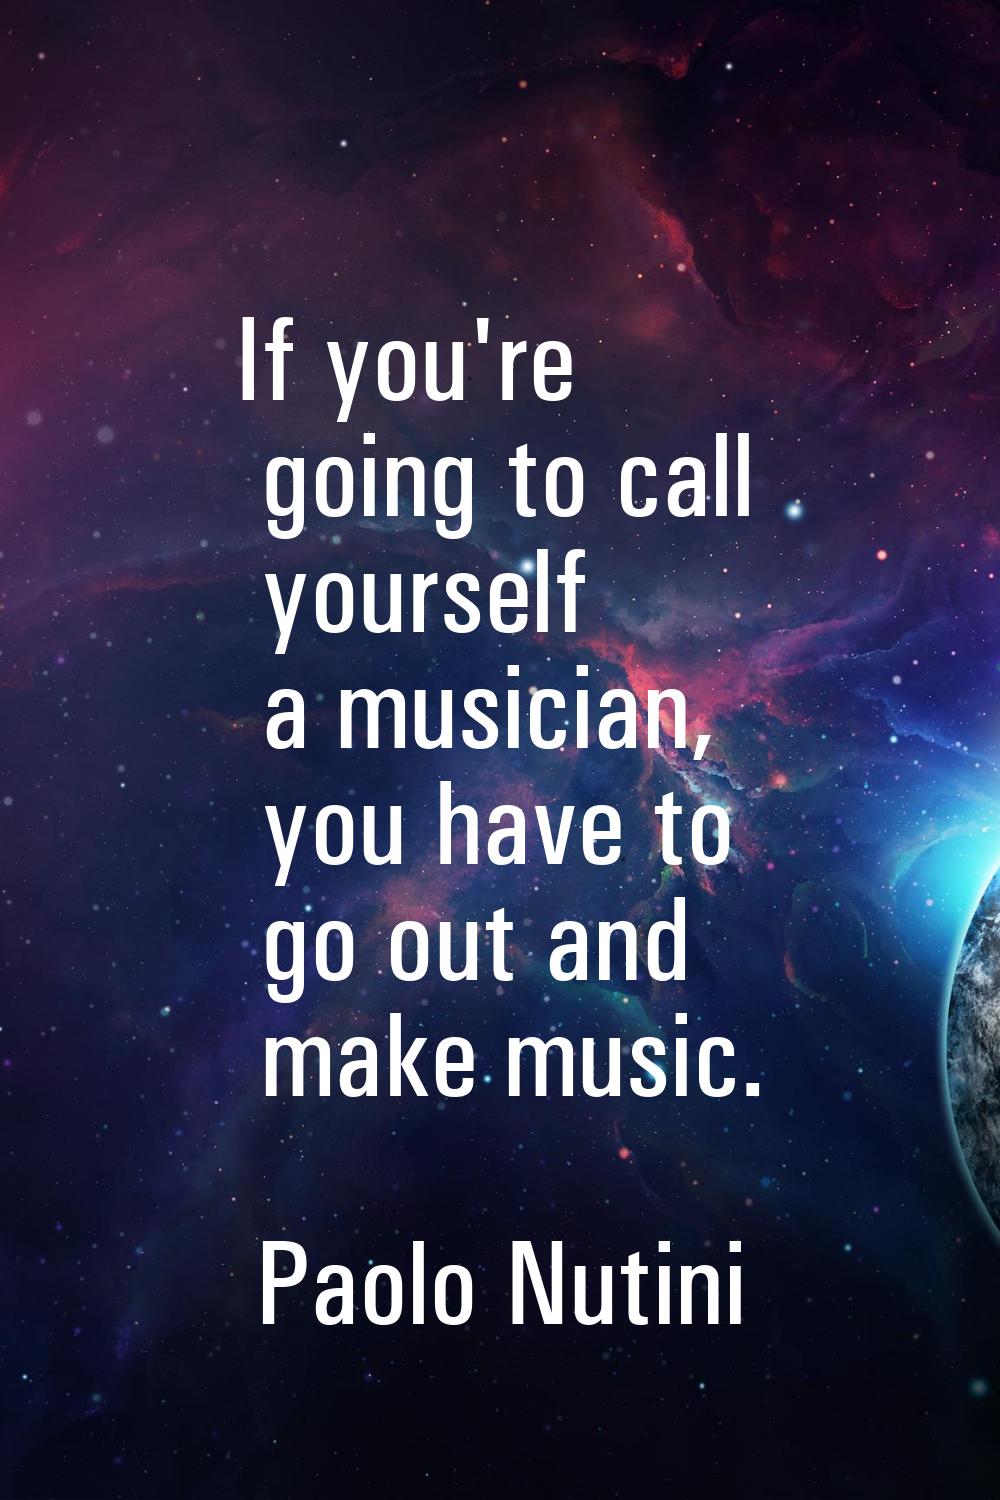 If you're going to call yourself a musician, you have to go out and make music.